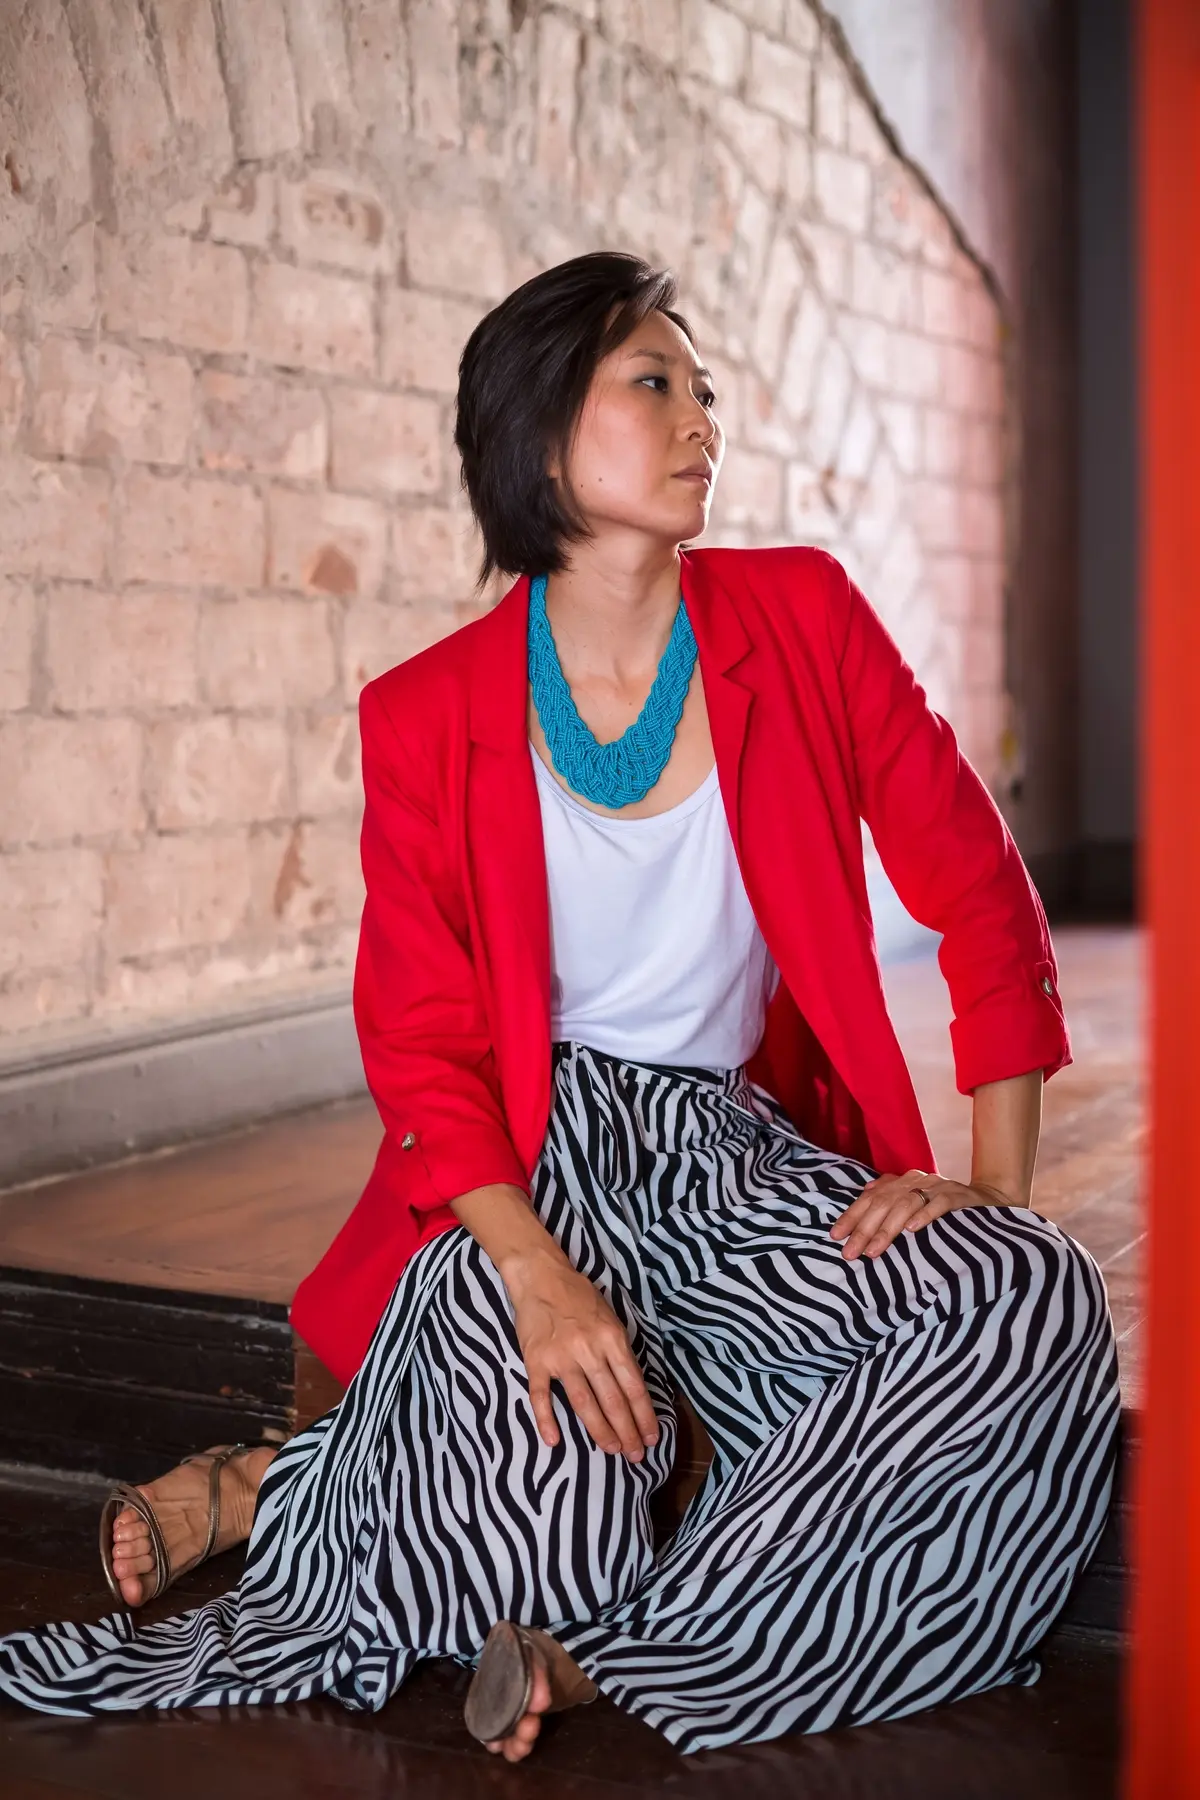 zebra patterned trousers paired with white top and red blazer